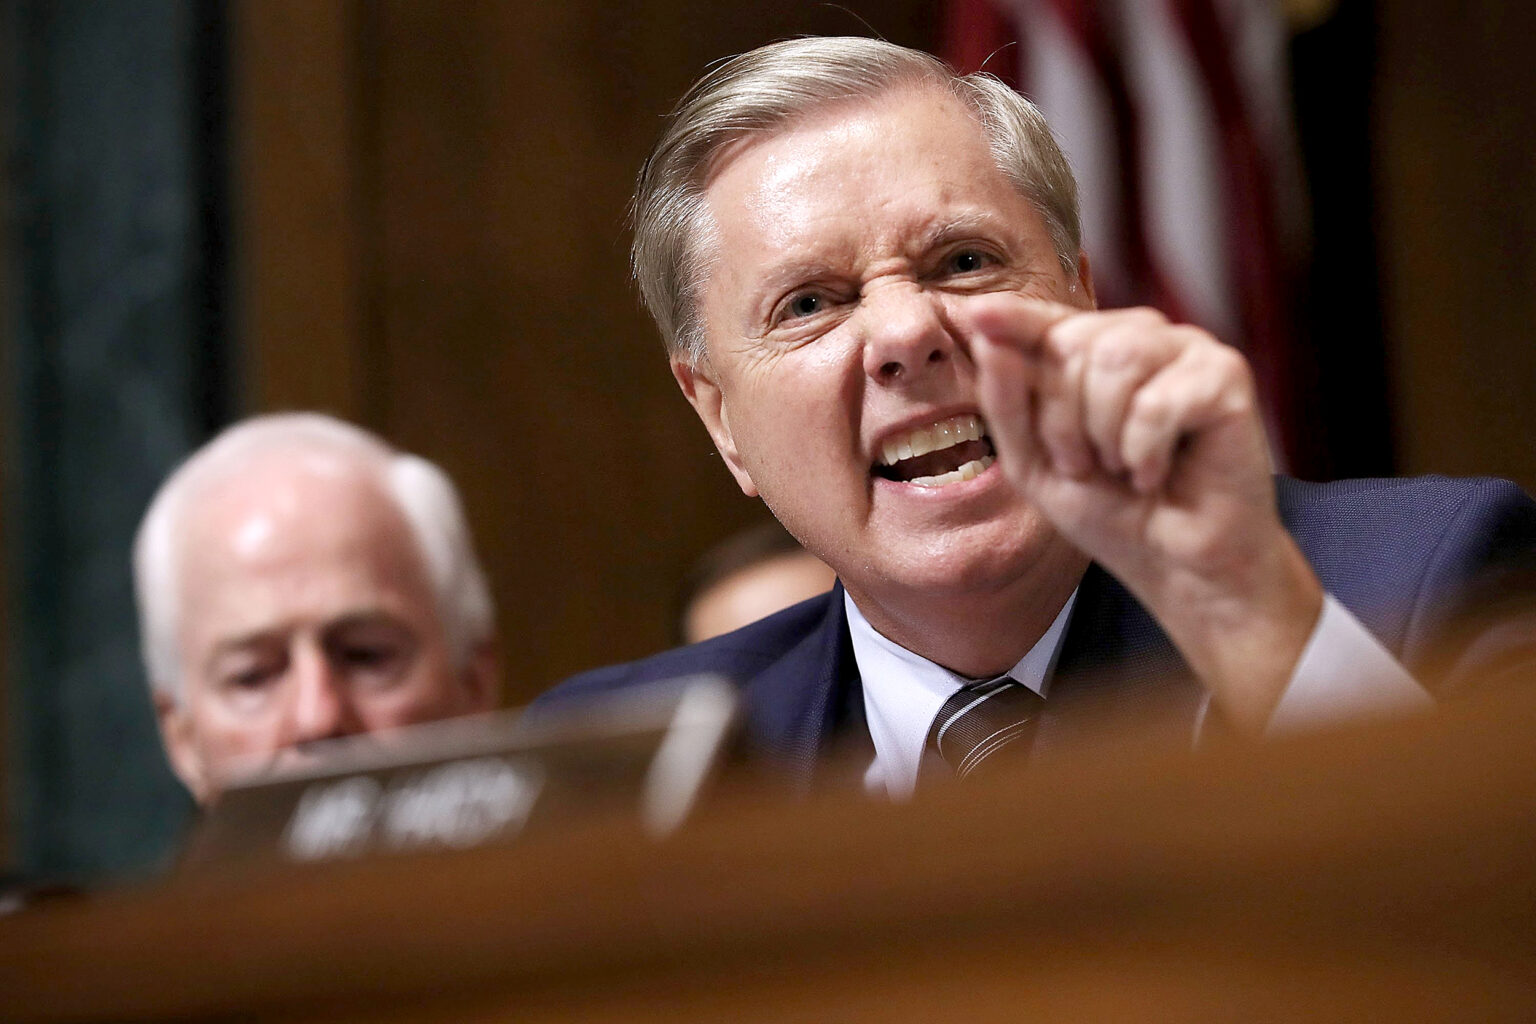 Look who's being controversial again. Lindsey Graham can't stay out of the limelight. Here are some of the best memes attacking the Senator.